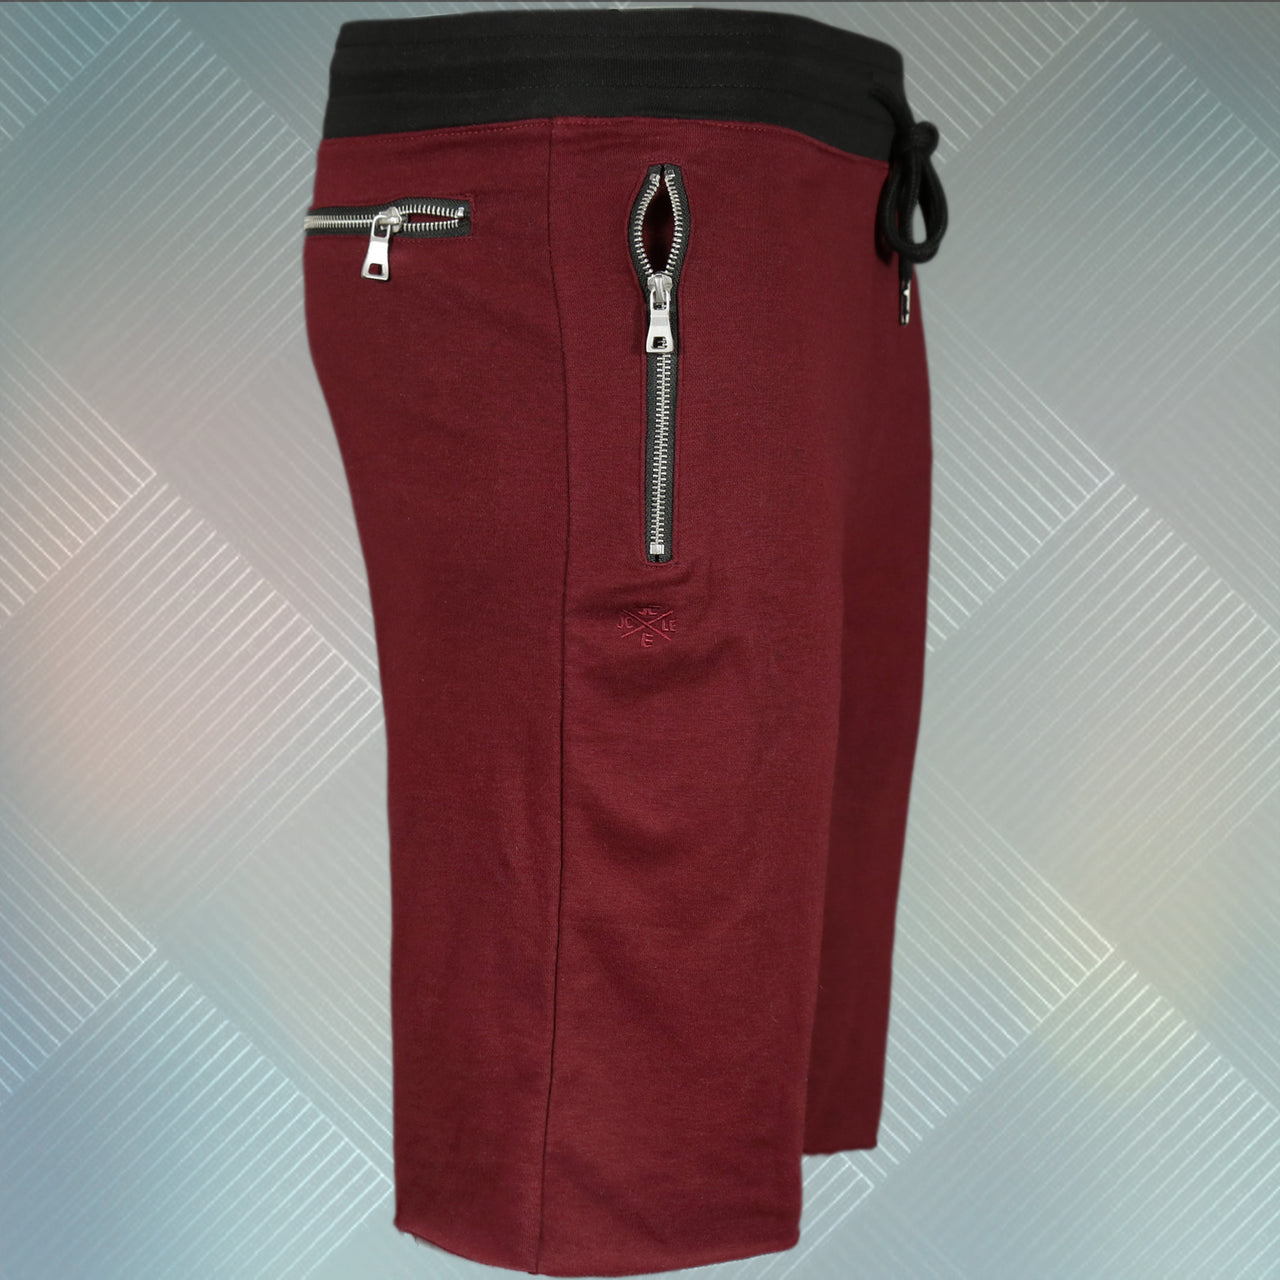 zipper pocket on the Wine Maroon Tracksuit Inspired Jogger Sweat Shorts